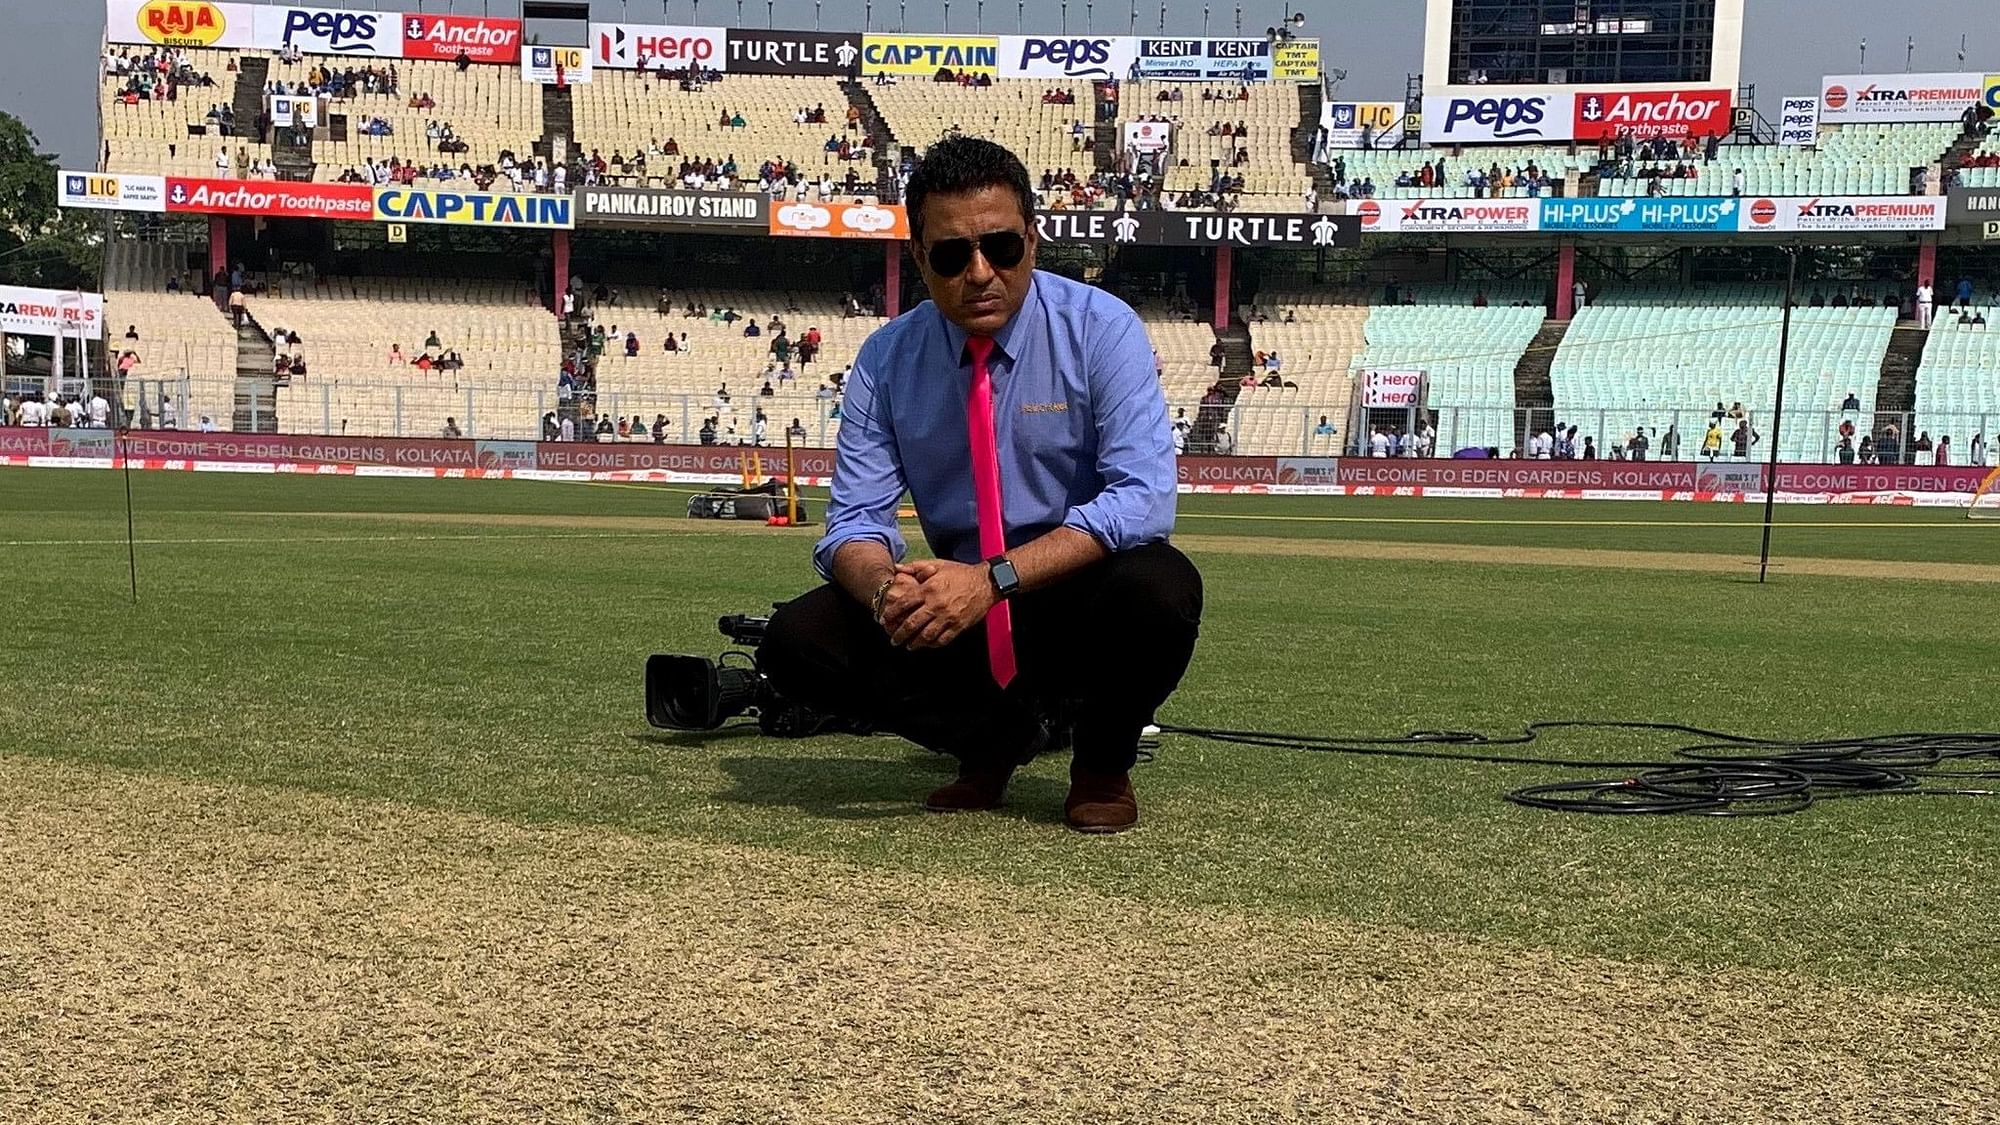 Sanjay Manjrekar is being criticised of being disrespectful towards Harsha Bhogle during commentary.